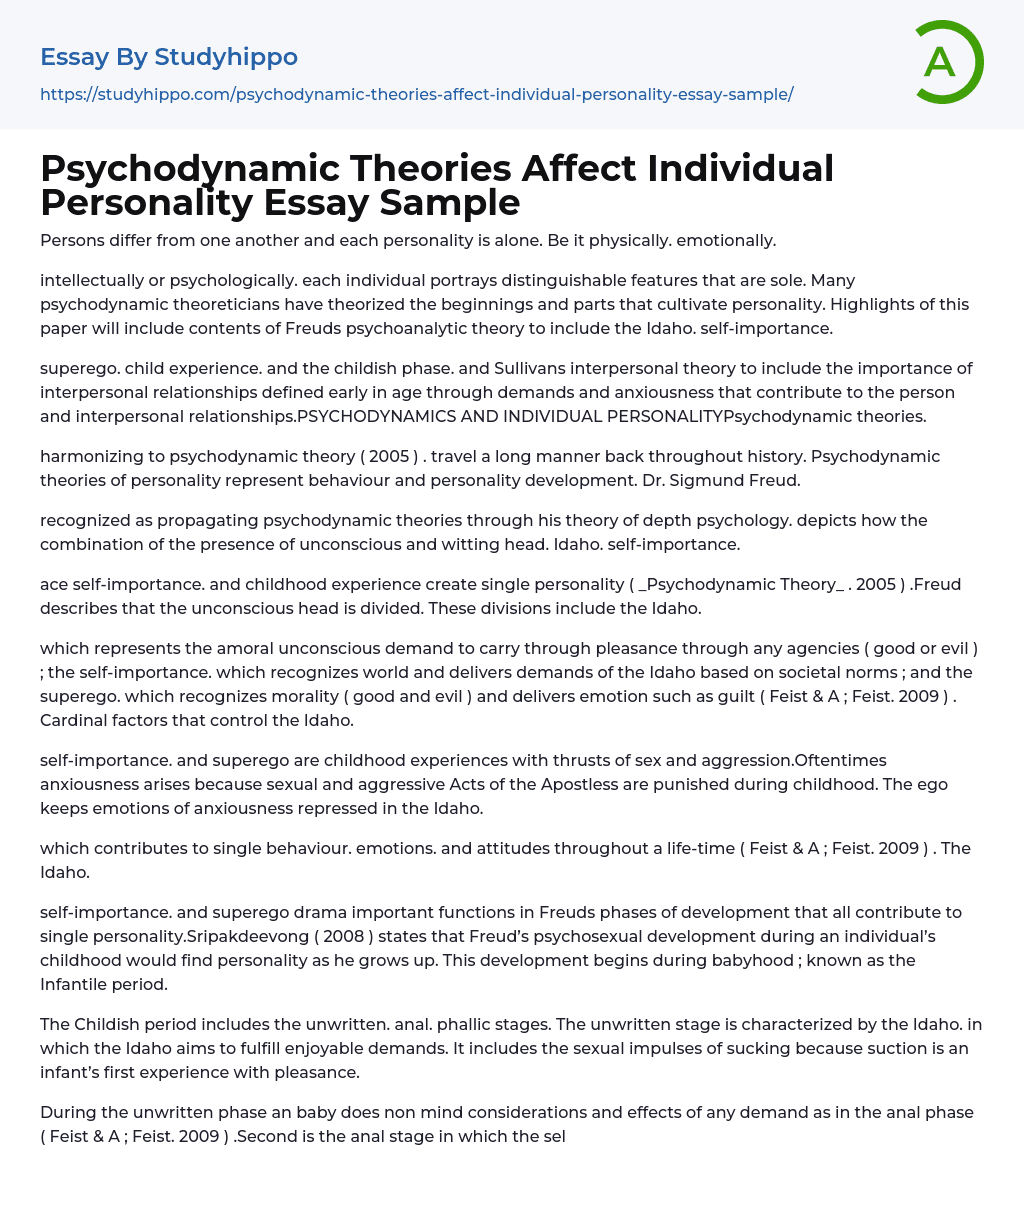 Psychodynamic Theories Affect Individual Personality Essay Sample